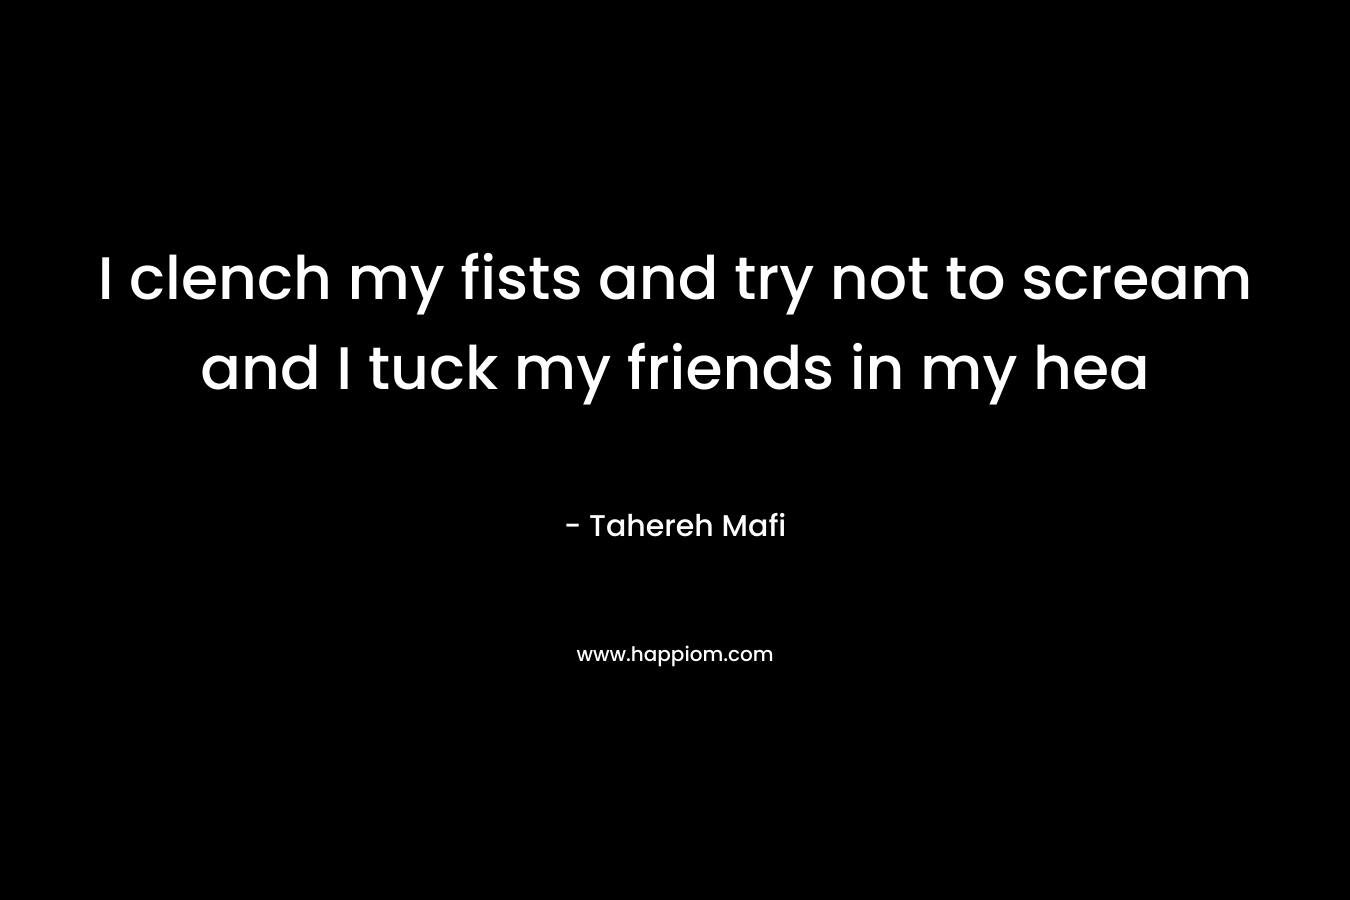 I clench my fists and try not to scream and I tuck my friends in my hea – Tahereh Mafi